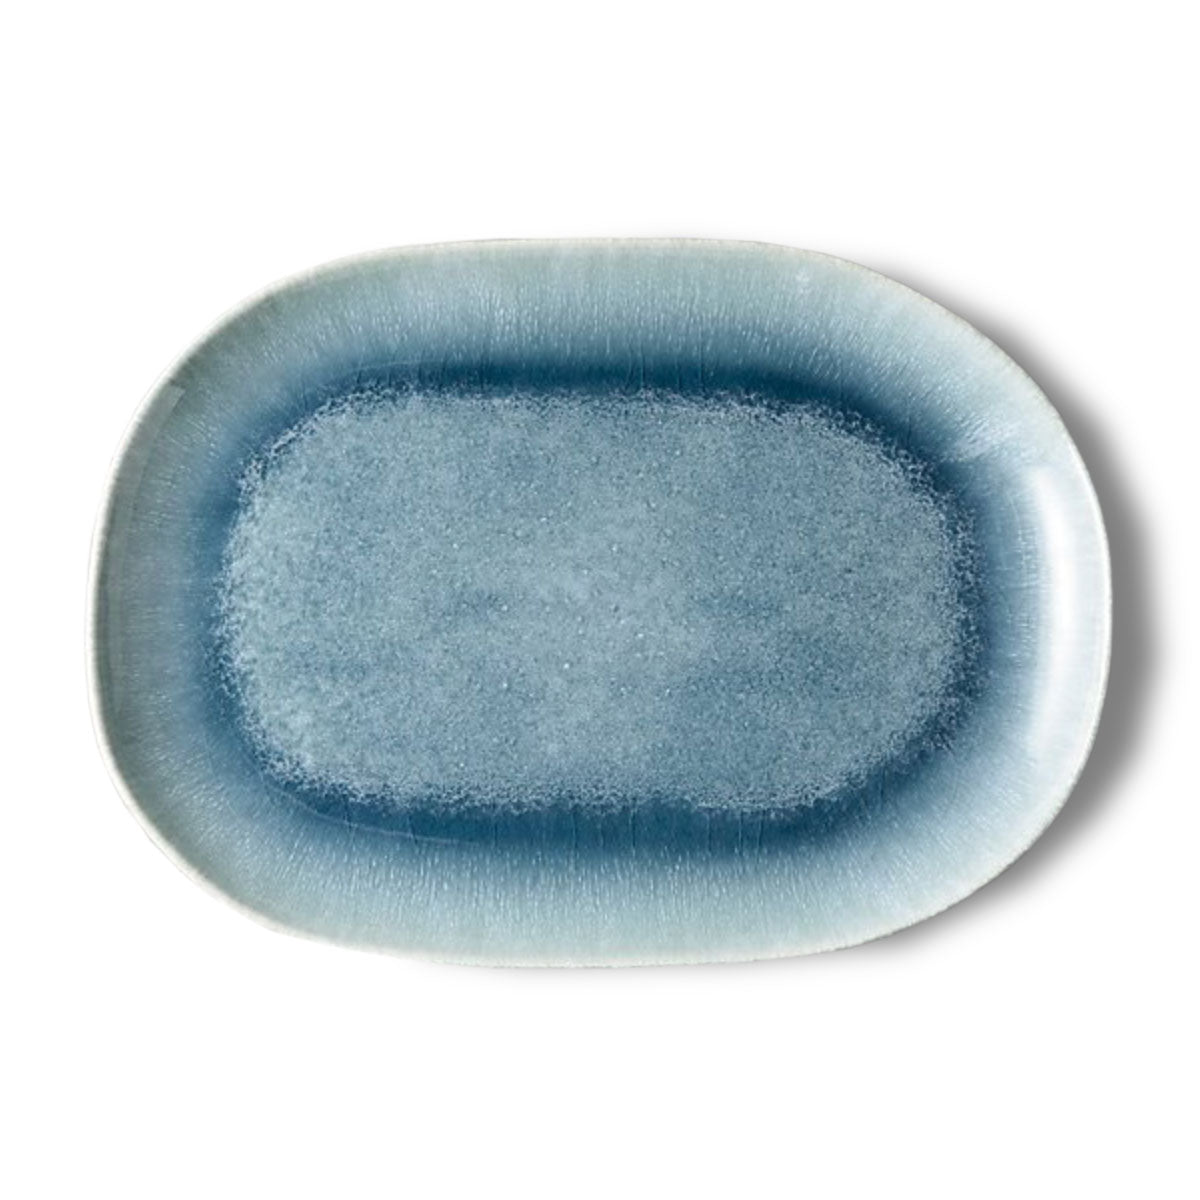 BLUE GLAZED SERVING DISH by Suuuper